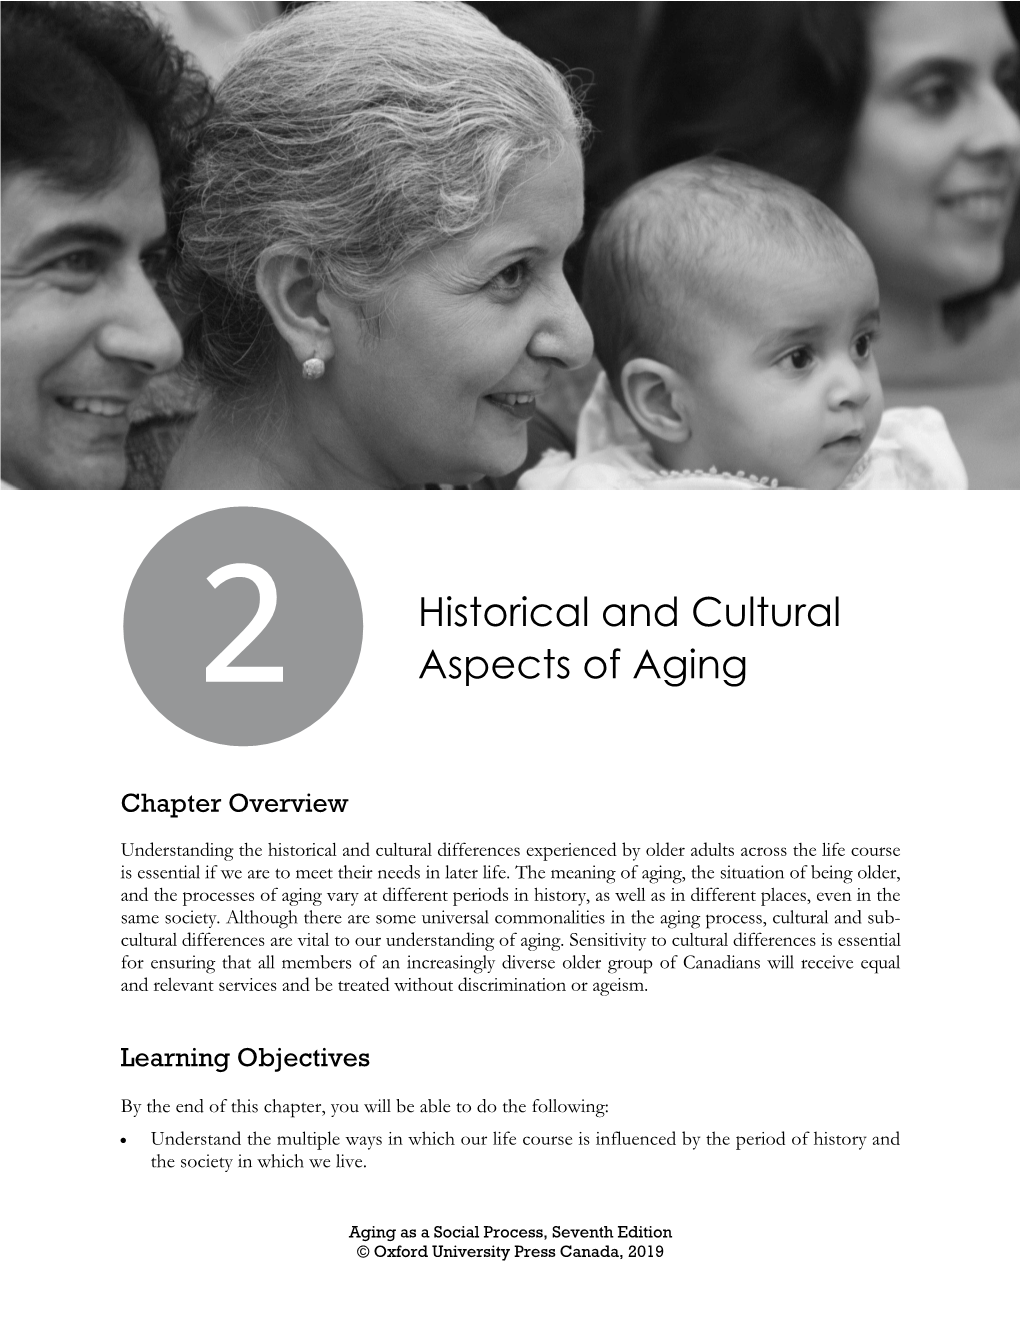 2 Historical and Cultural Aspects of Aging